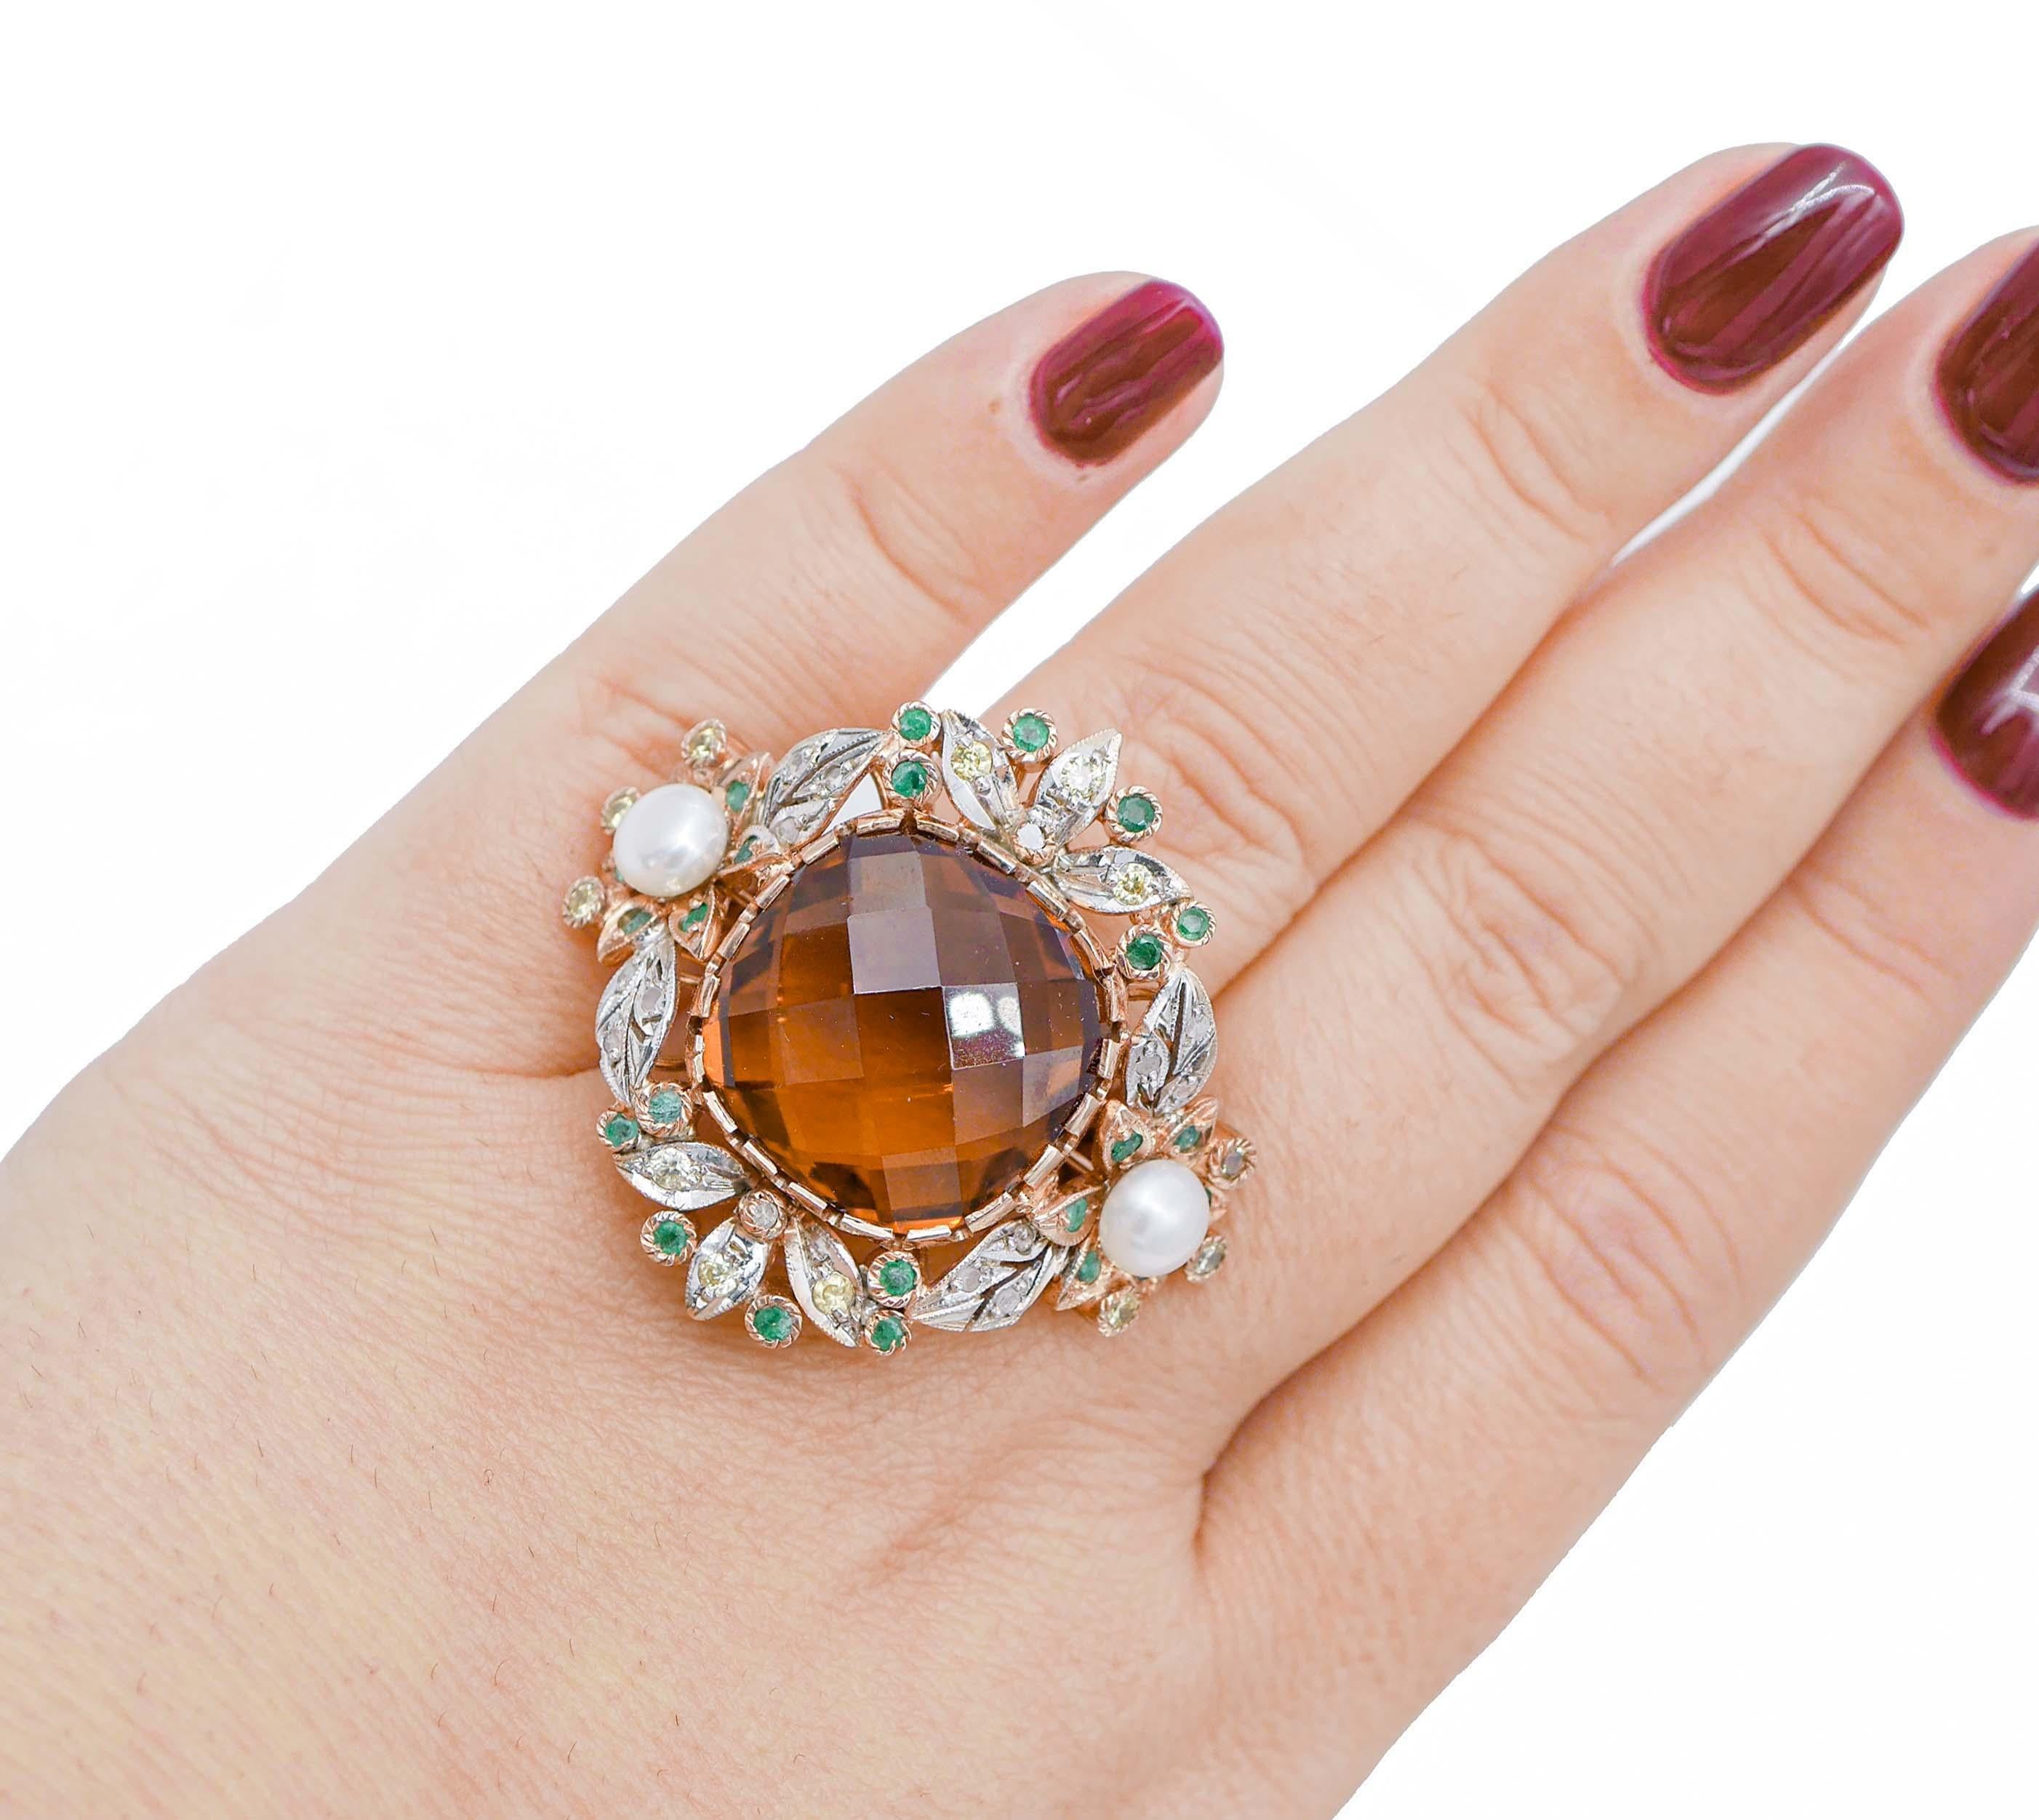 Topaz, Emeralds, Diamonds, Pearls, Rose Gold and Silver Retrò Ring In Good Condition For Sale In Marcianise, Marcianise (CE)